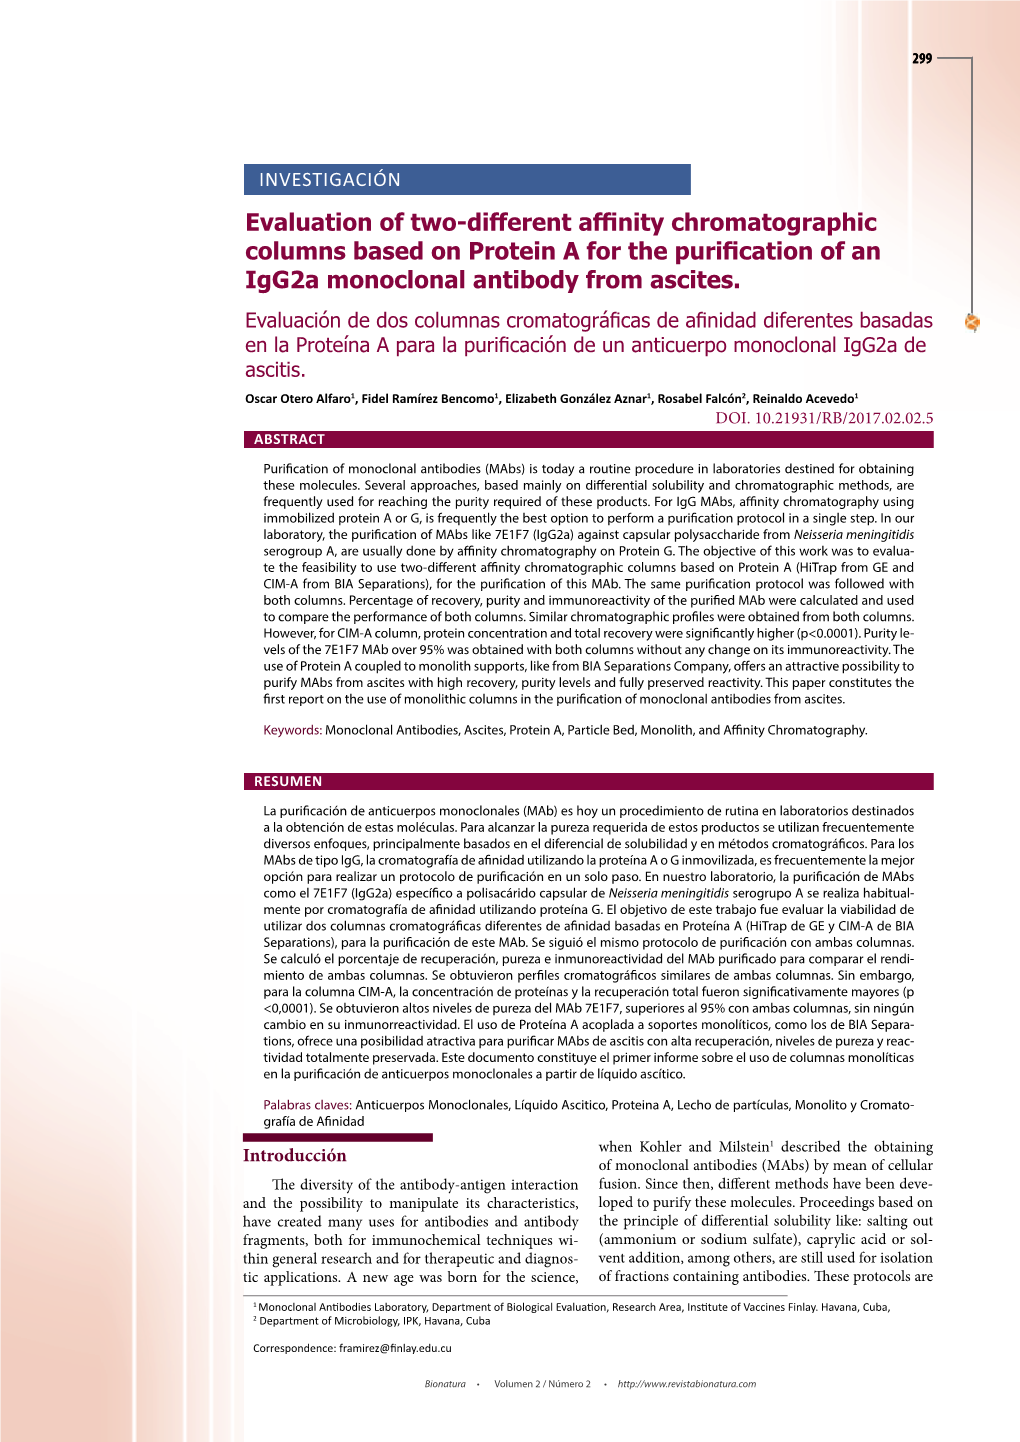 Evaluation of Two-Different Affinity Chromatographic Columns Based on Protein a for the Purification of an Igg2a Monoclonal Antibody from Ascites